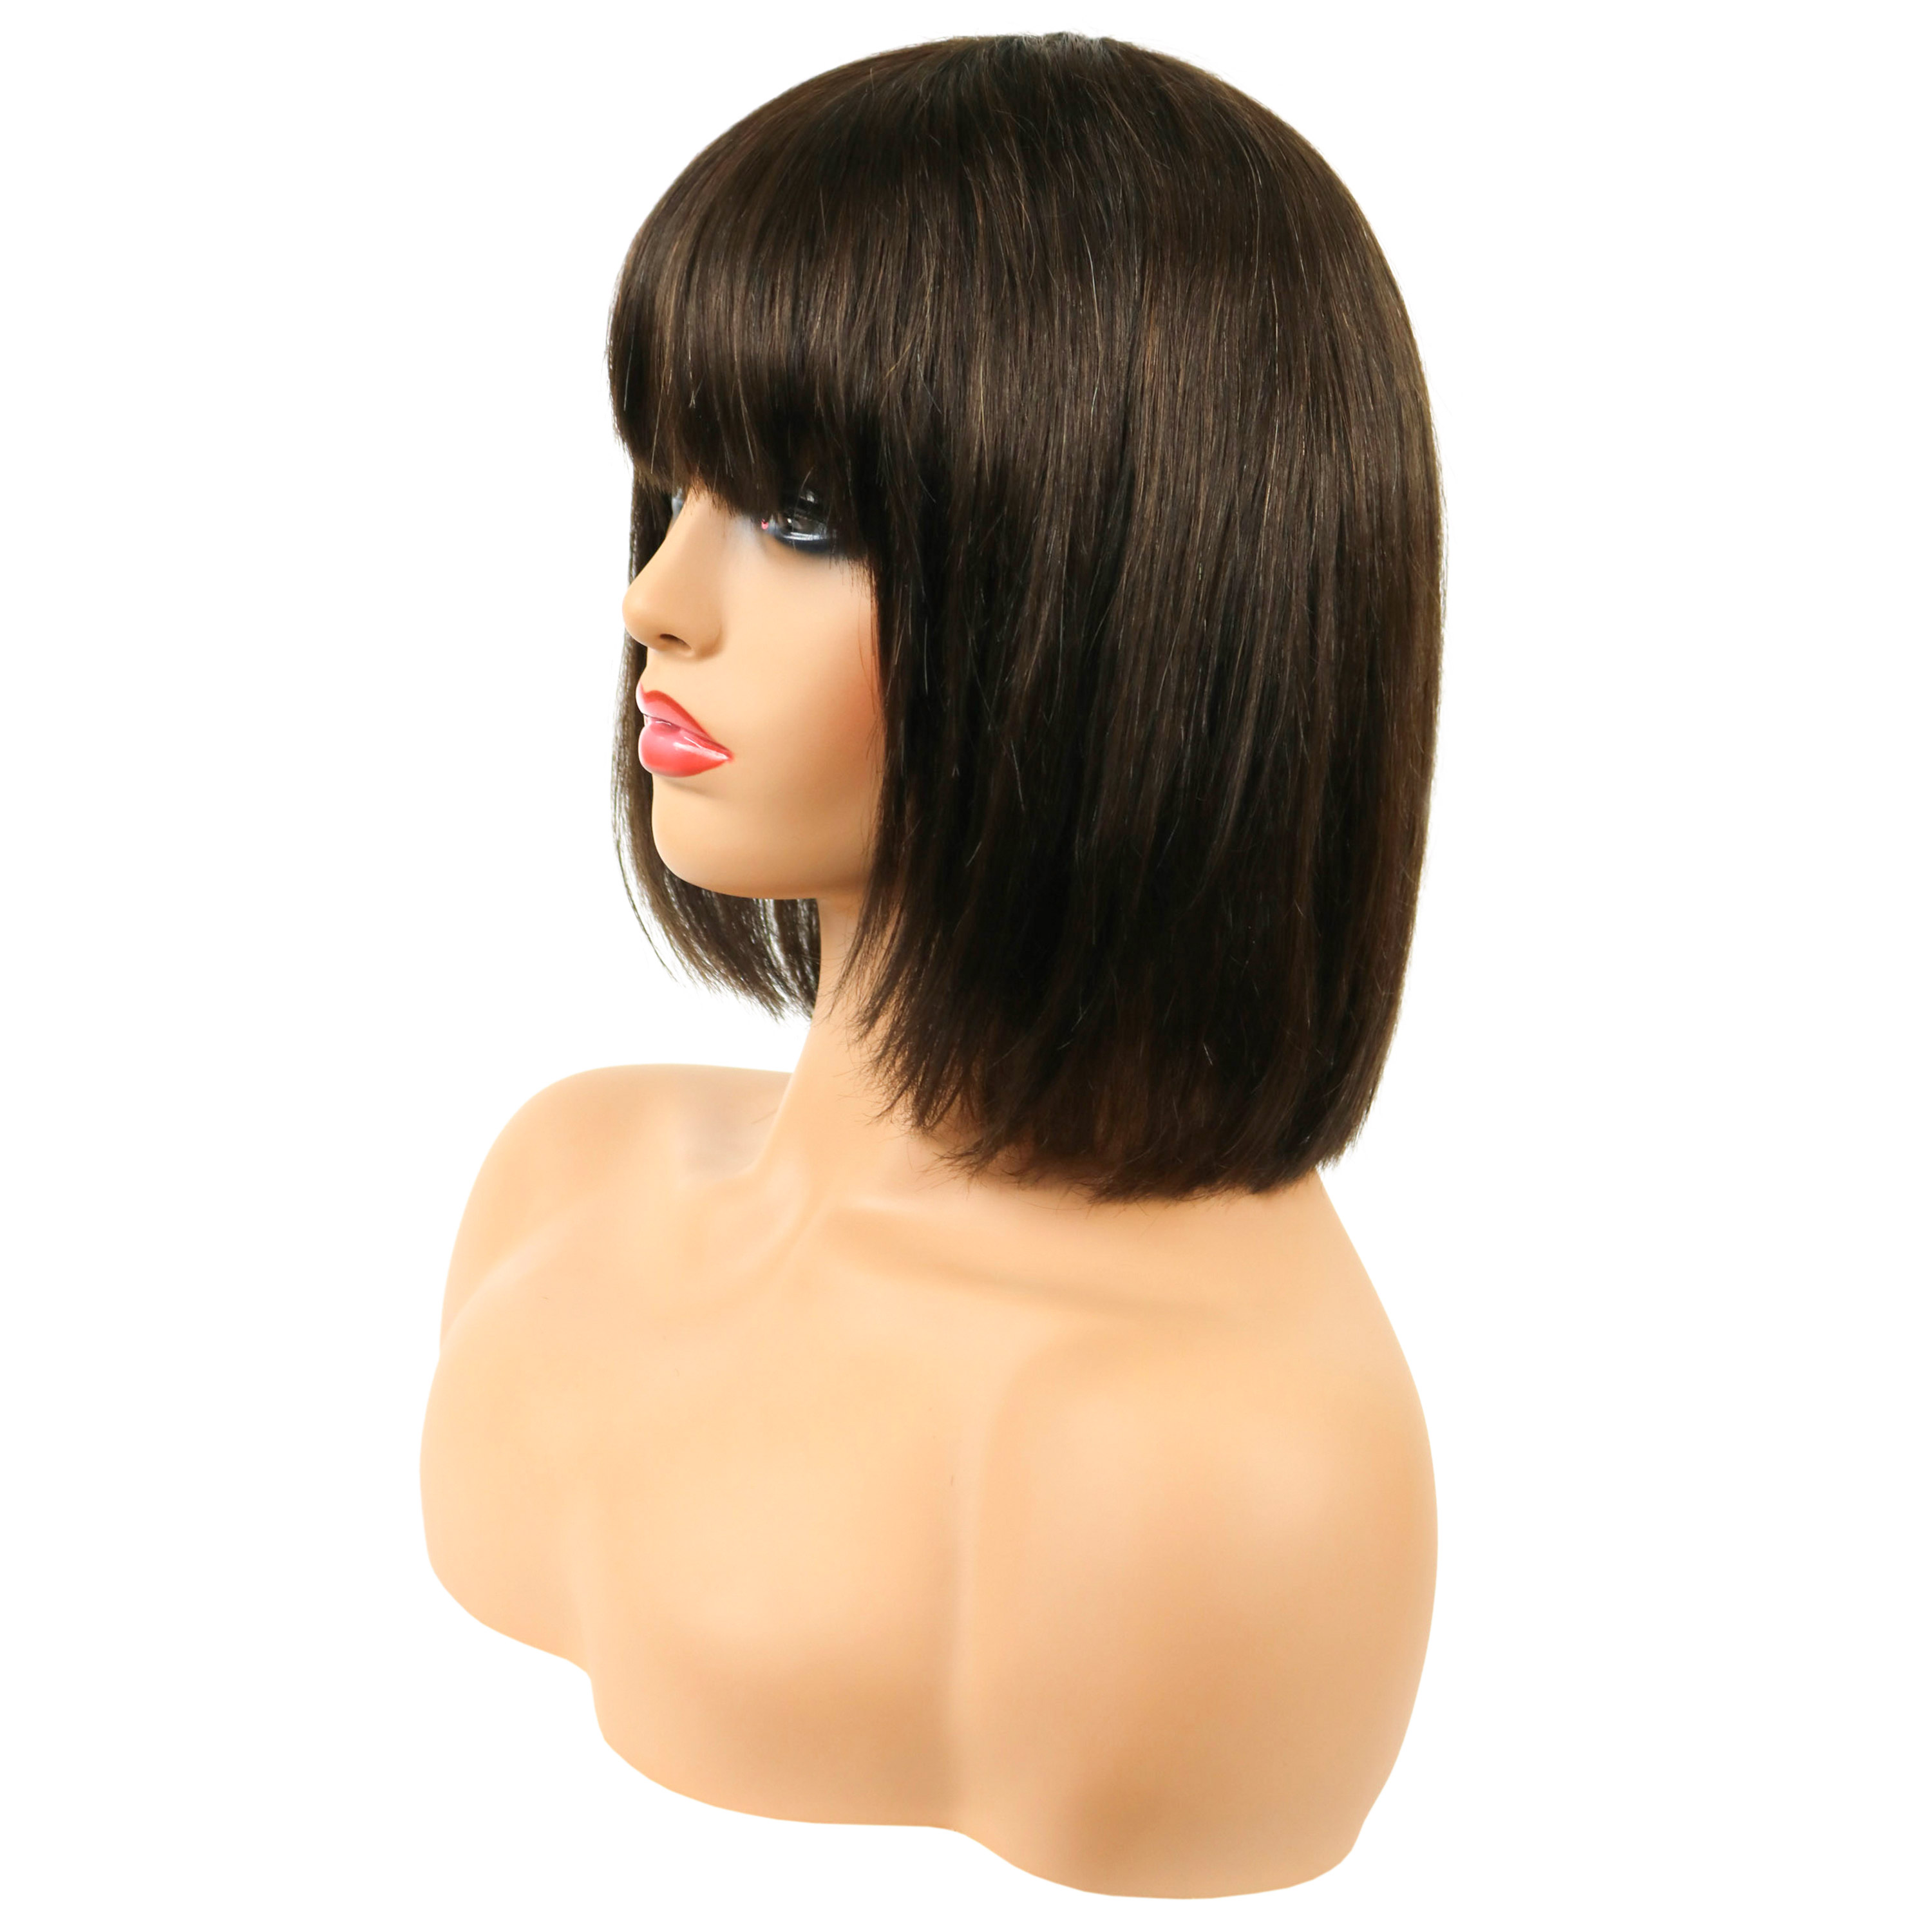 Short Straight Bob Wig Human Hair 10 Inches 120% Wigs With Full Bangs